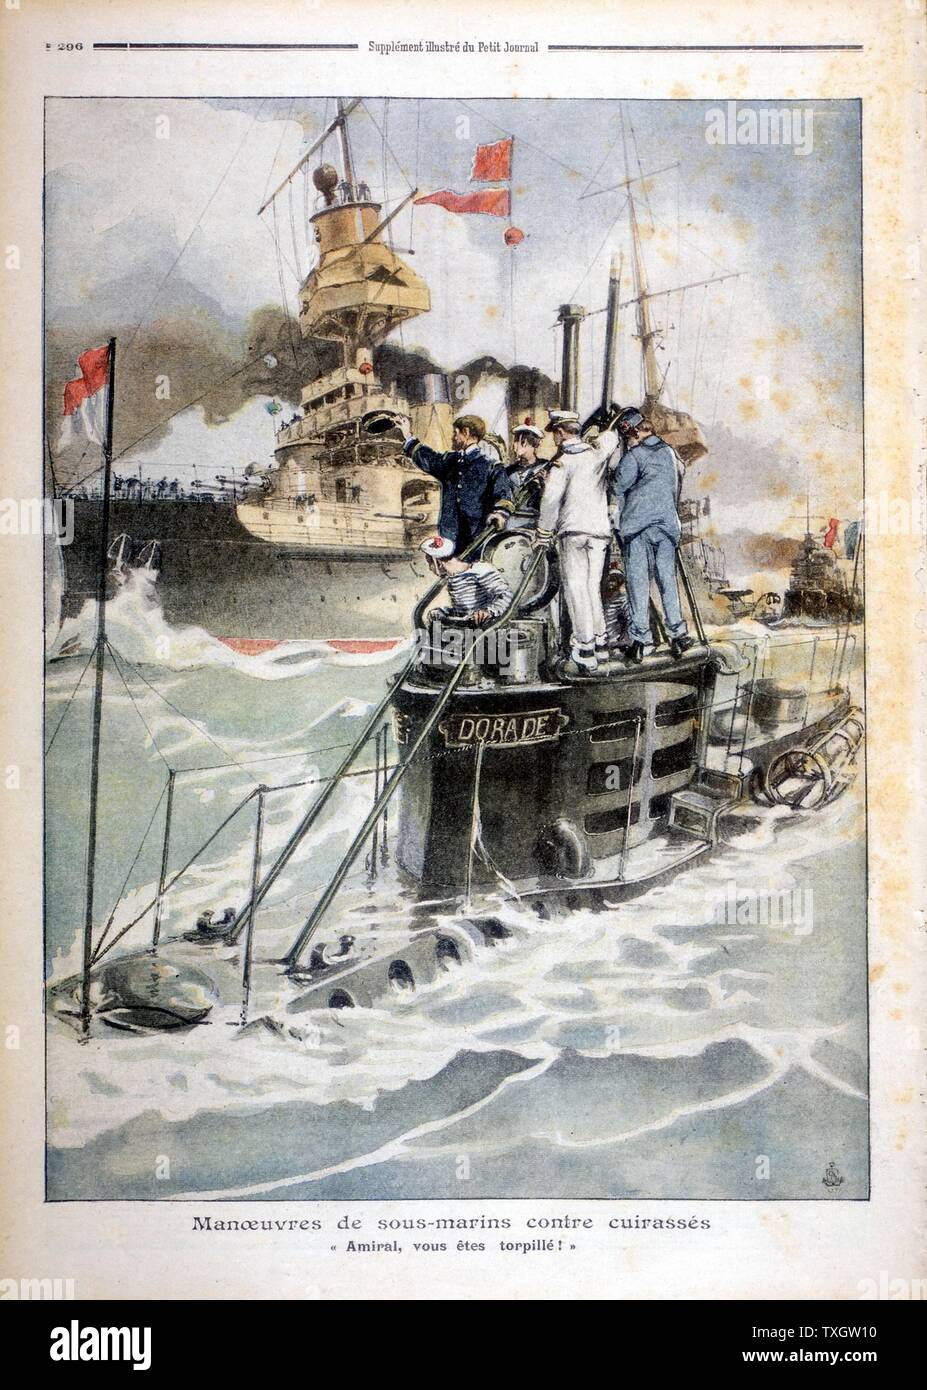 French naval exercises: Submarine Dorade surfacing to tell ironclad that she has been 'sunk'.  1908 Illustration from 'Le Petit Journal' Paris Stock Photo